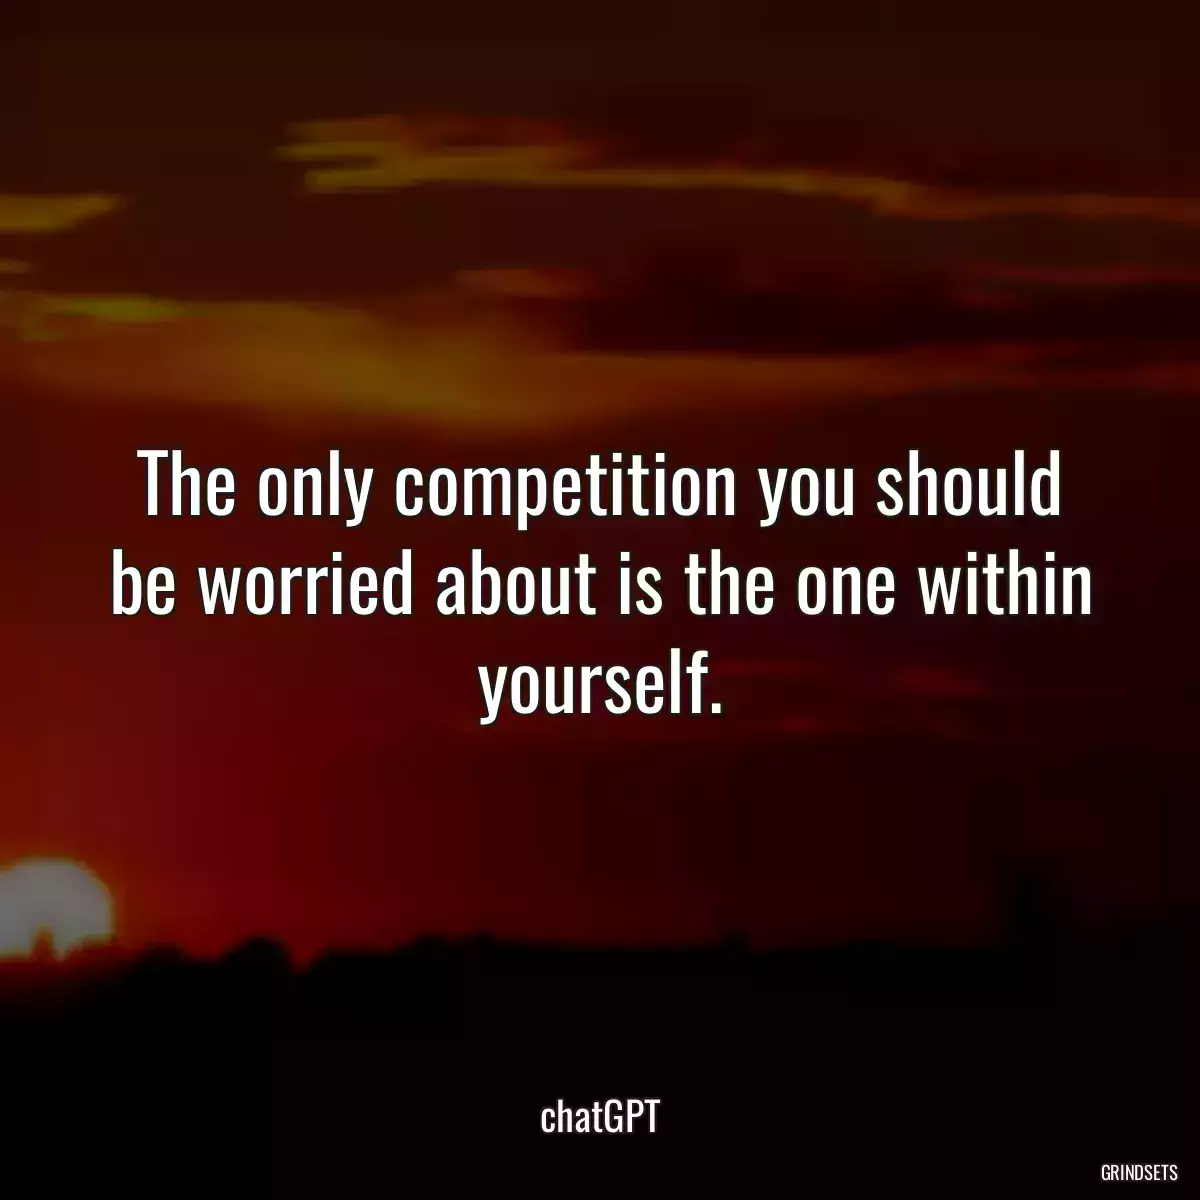 The only competition you should be worried about is the one within yourself.